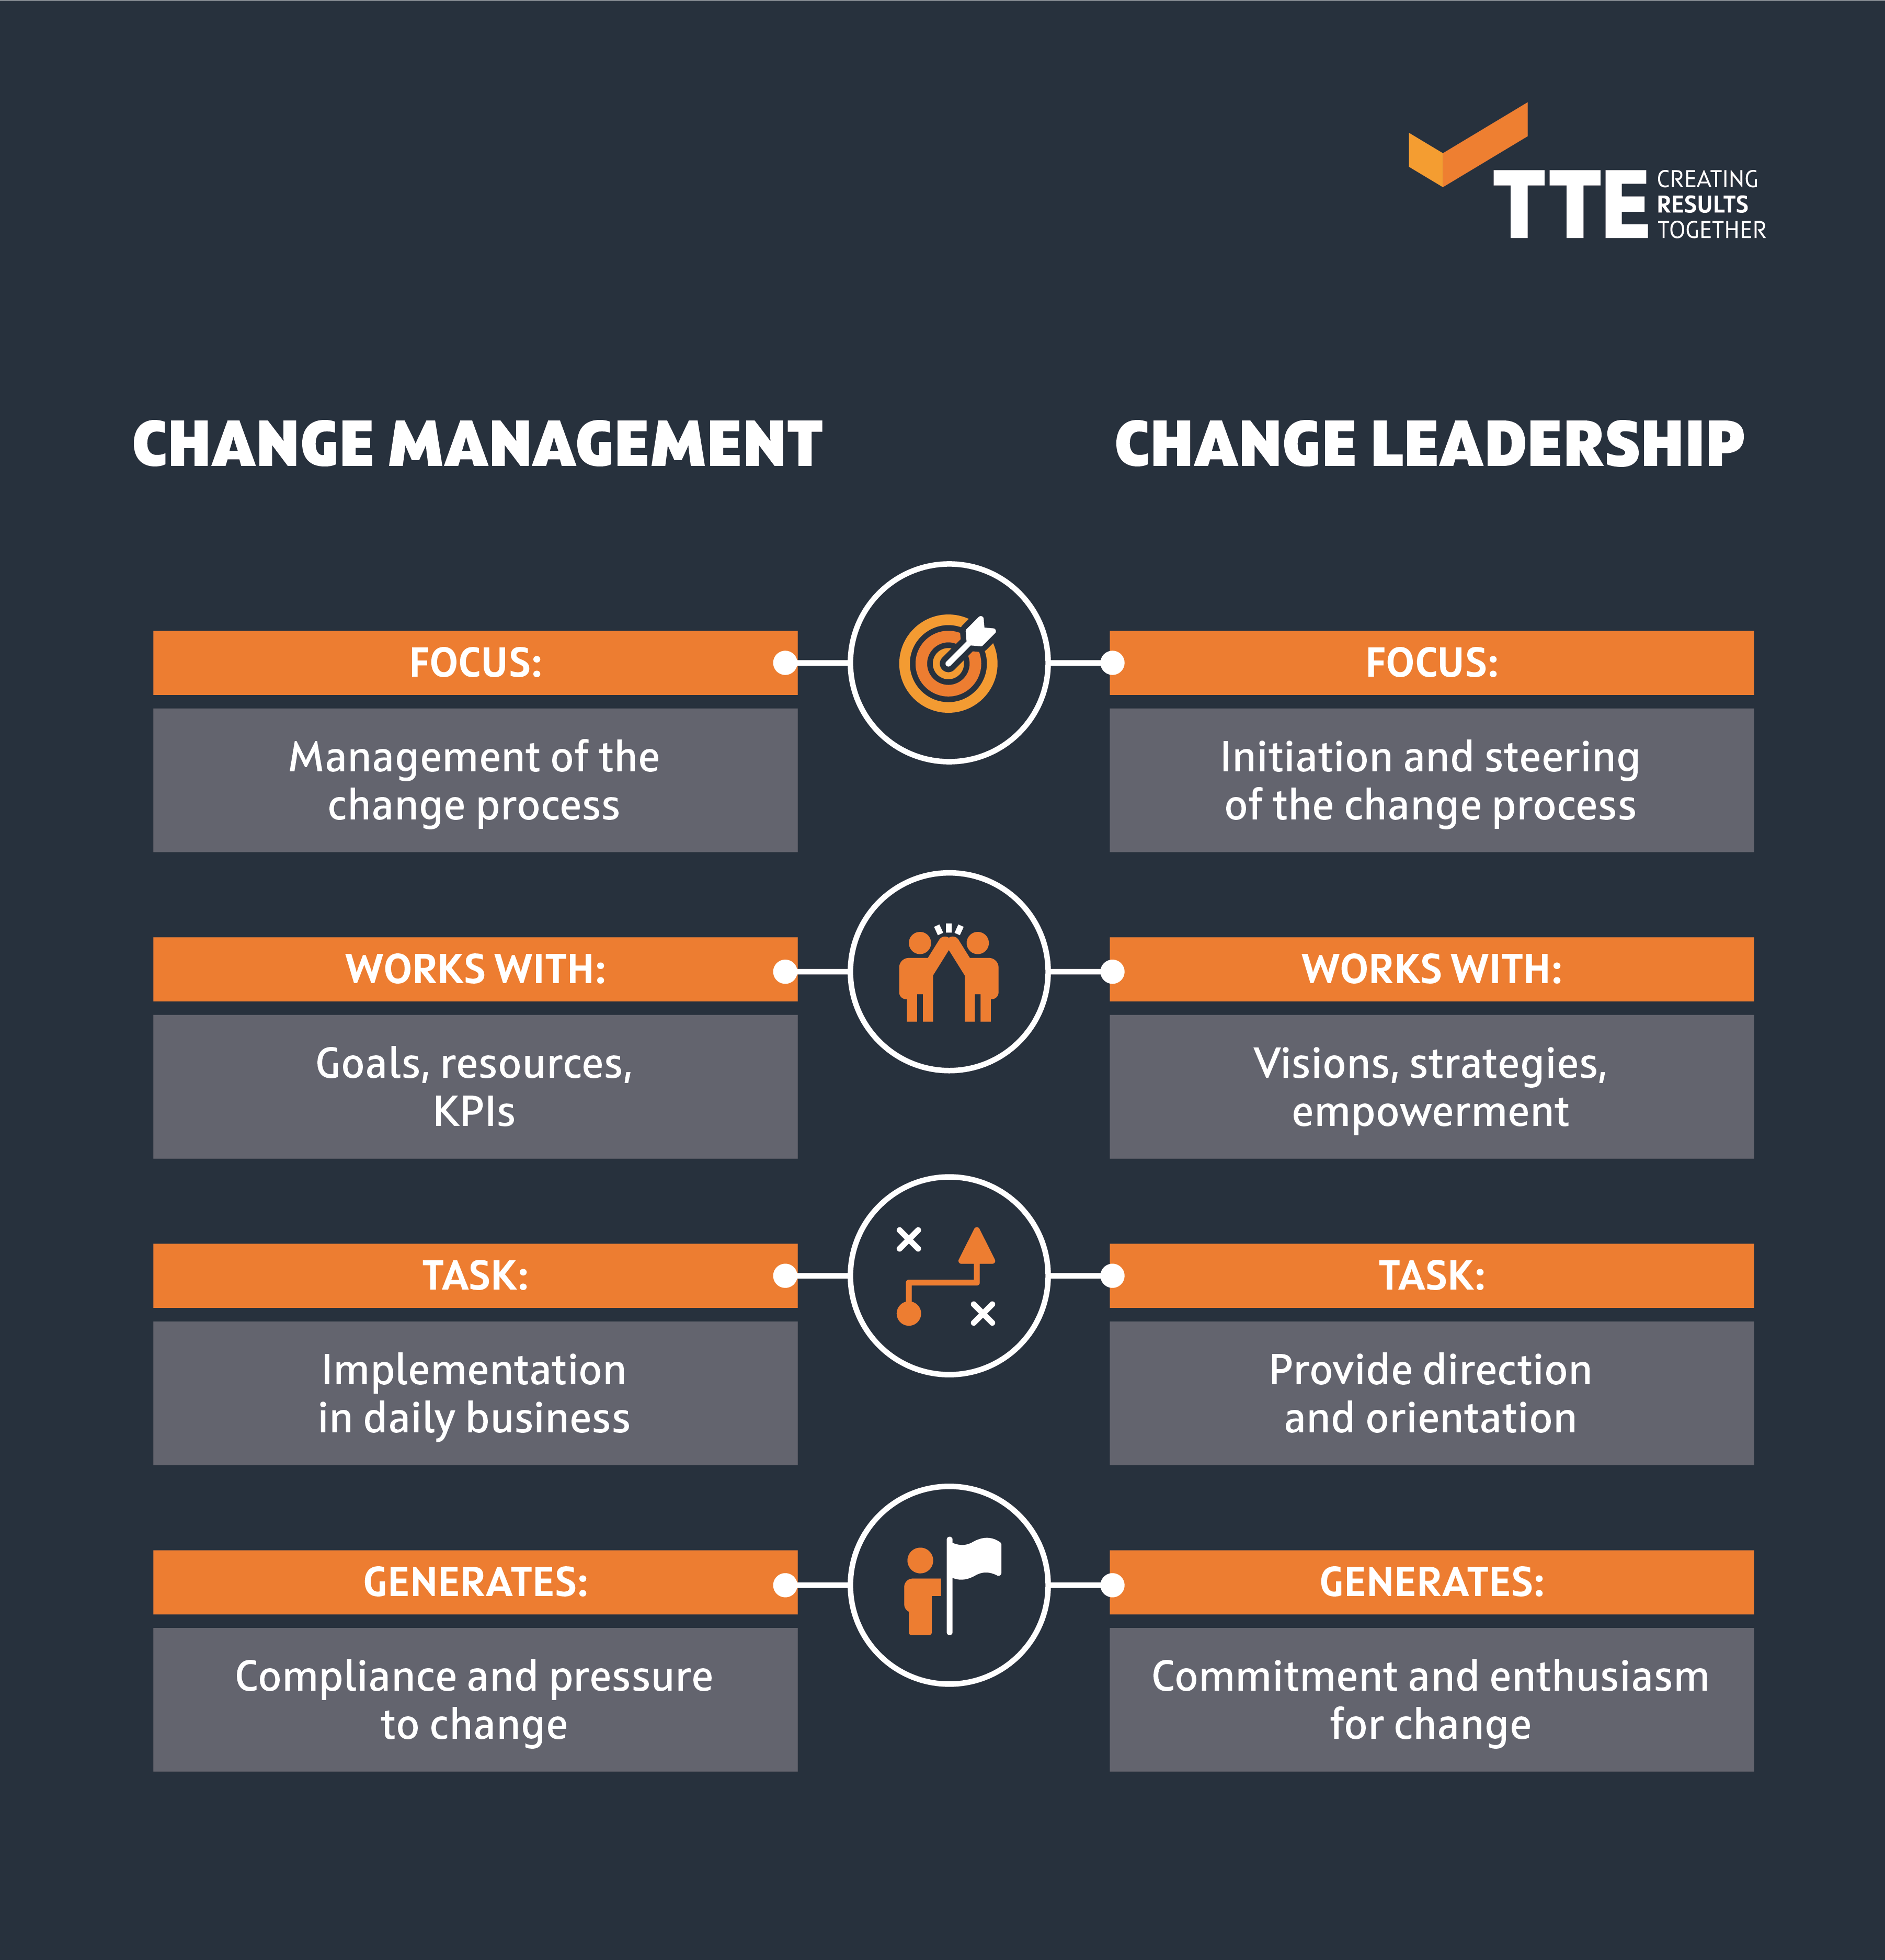 article review on leadership and change management